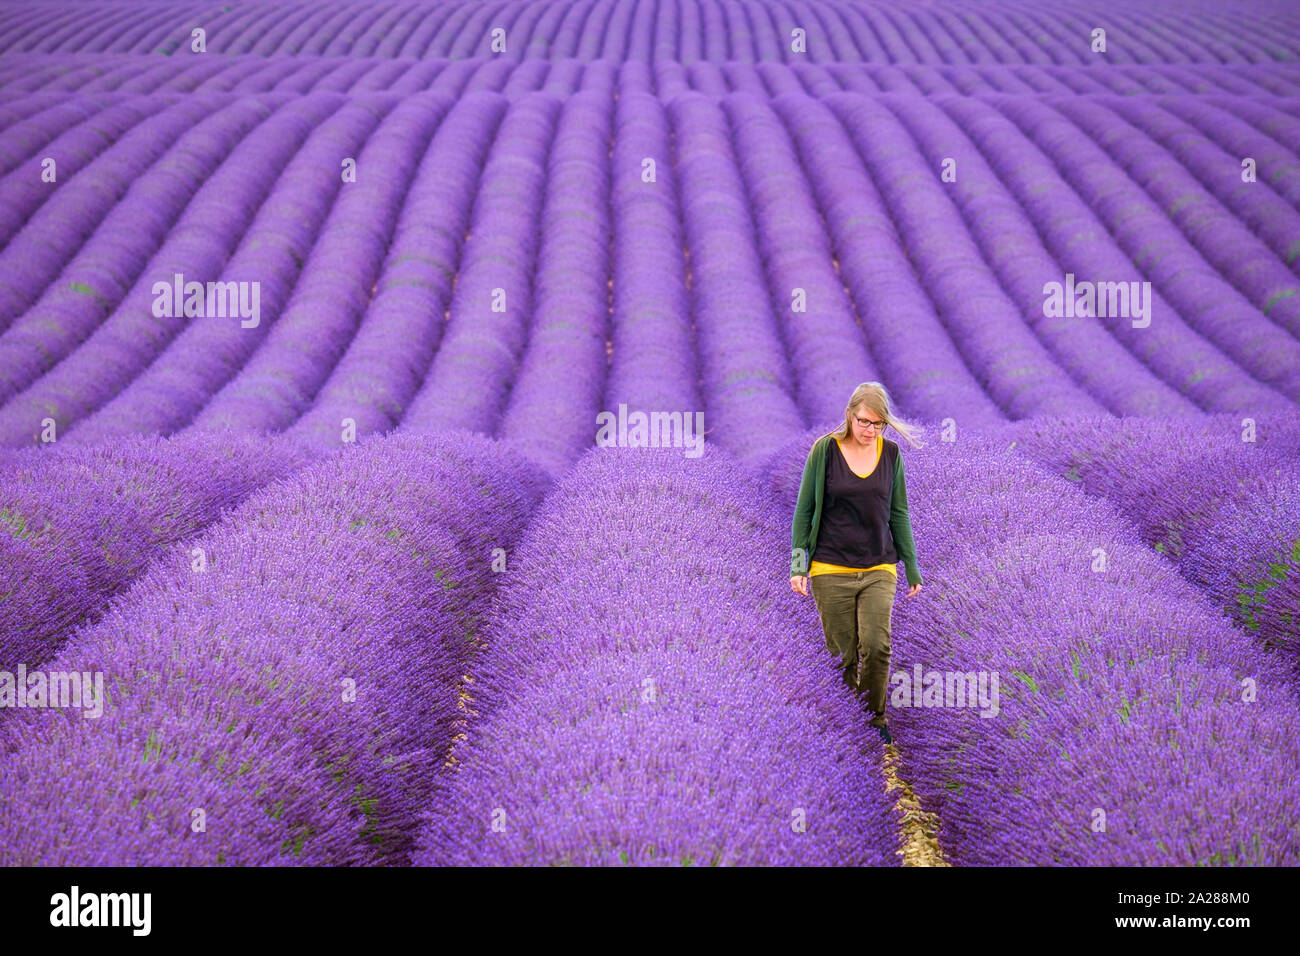 A young woman standing alone between rows of purple lavender in bloom in a field on the Plateau de Valensole near Puimoisson, Provence-Alpes-Côte d'Az Stock Photo